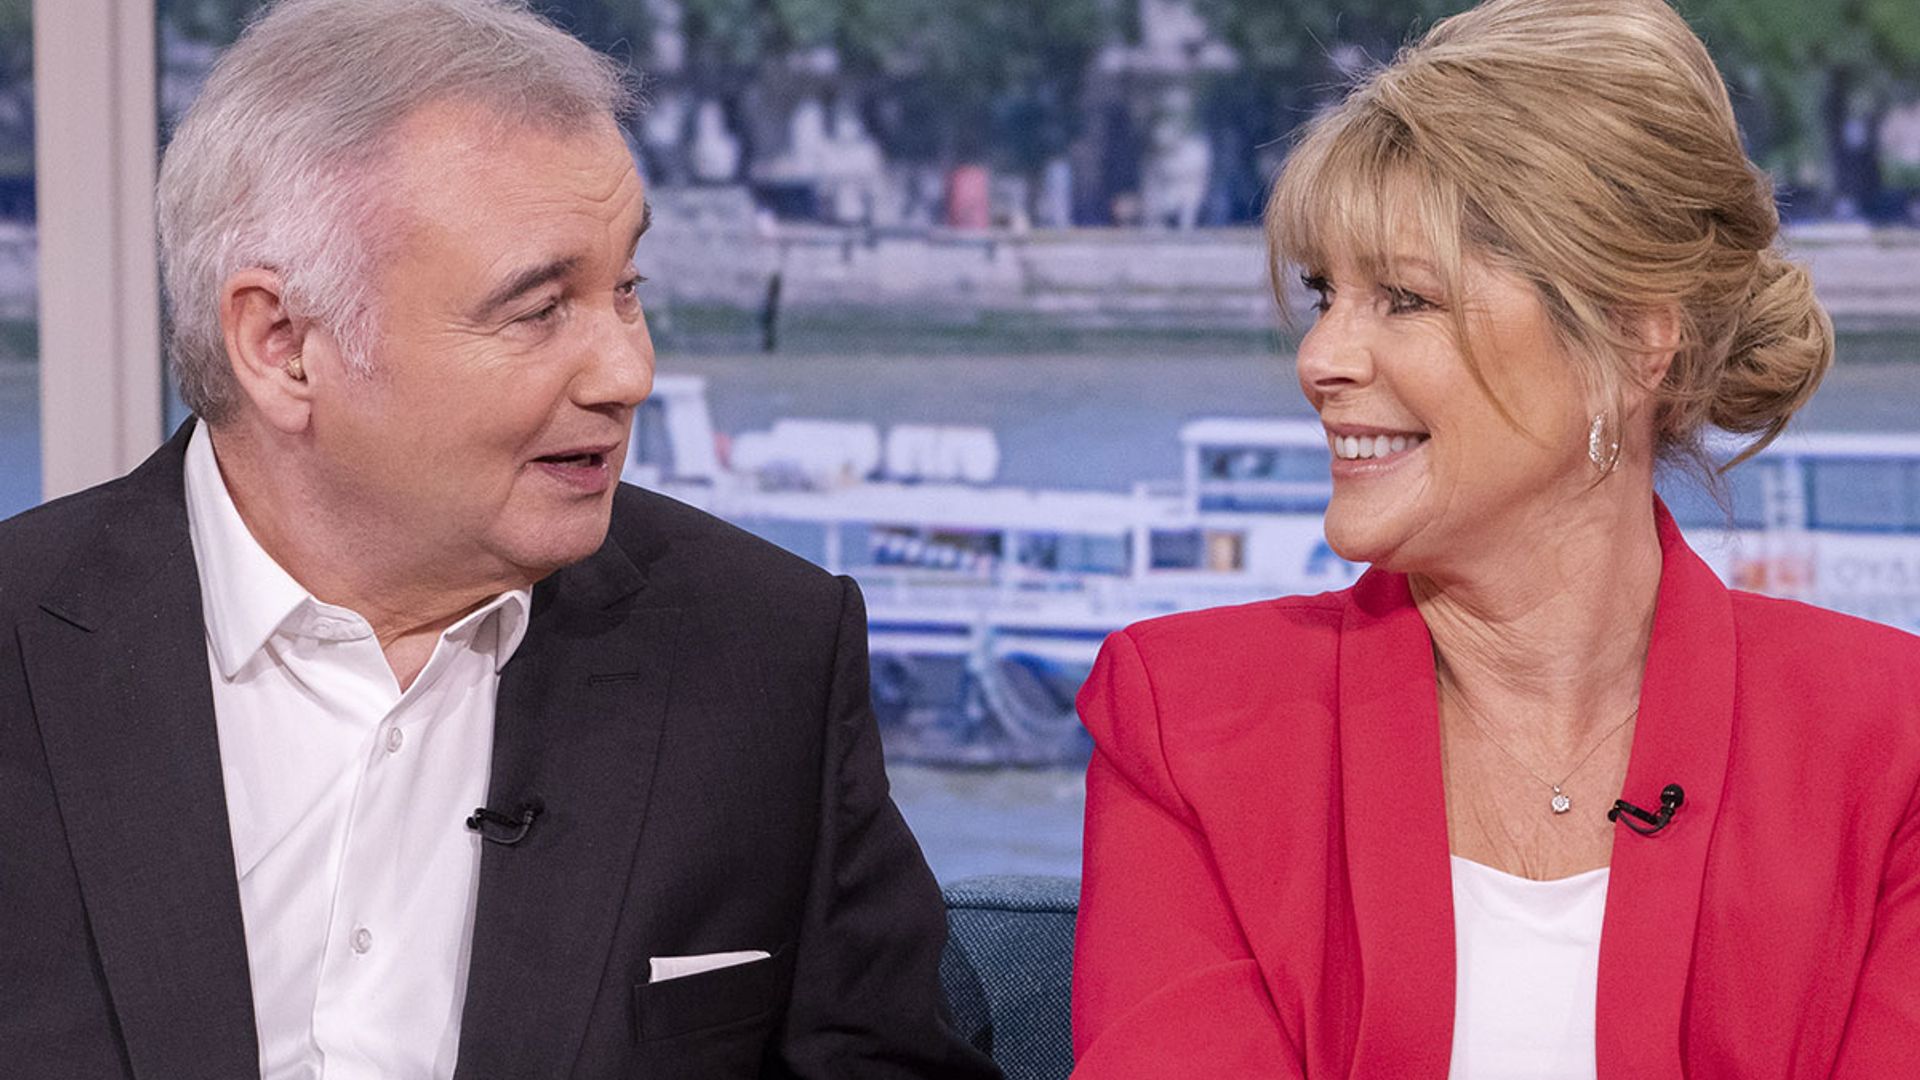 Ruth Langsford and Eamonn Holmes have very conflicting views about alcohol